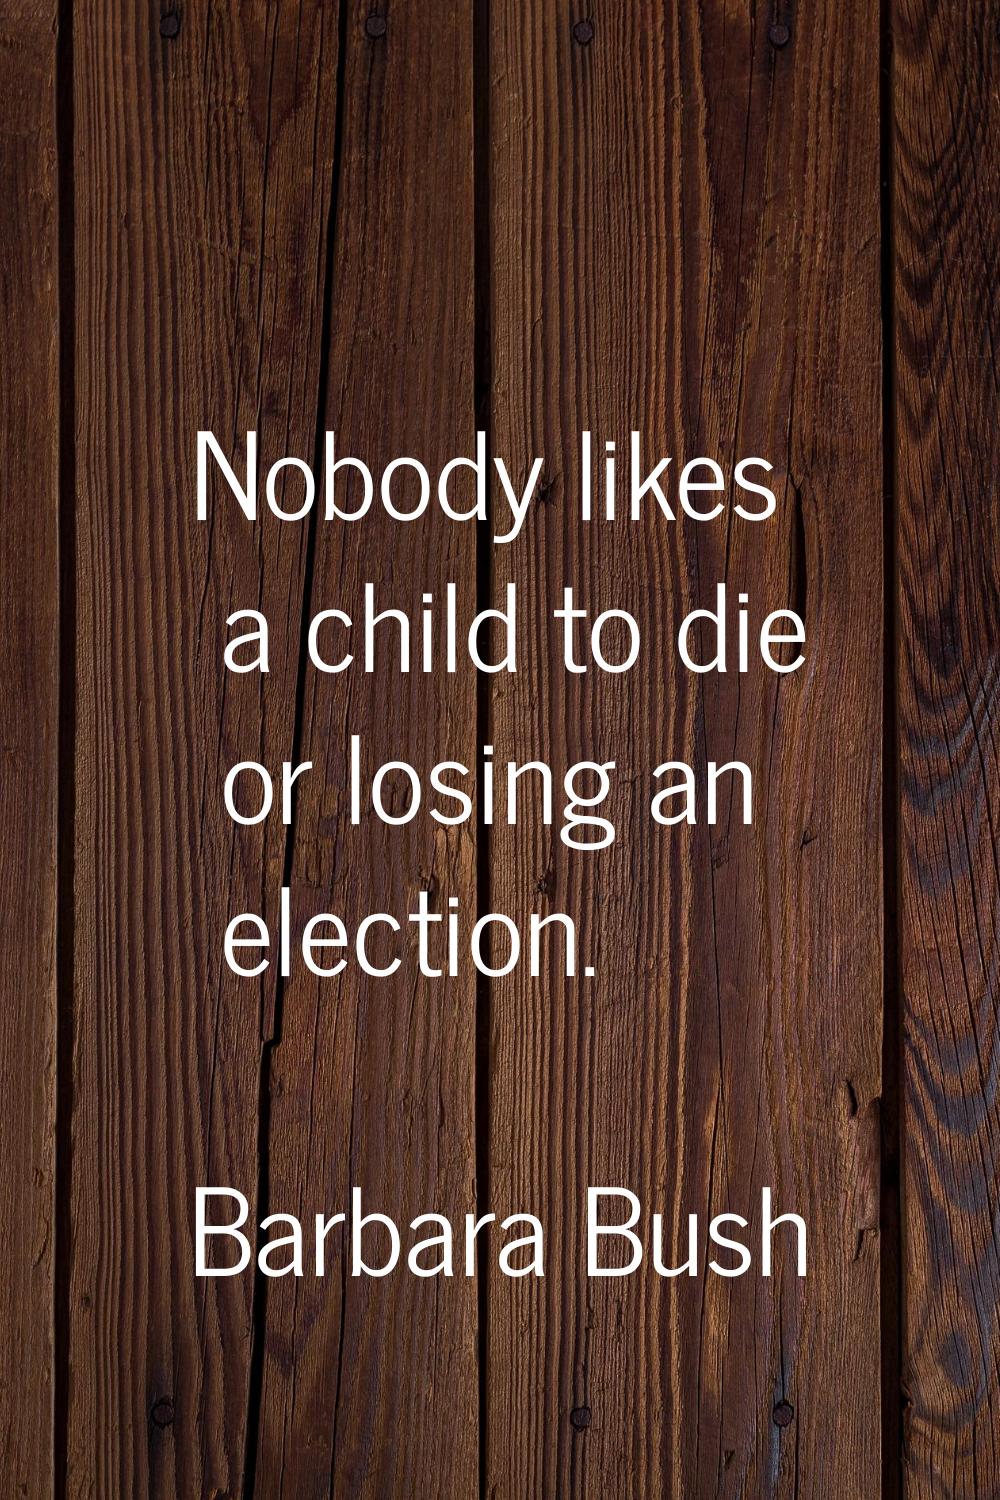 Nobody likes a child to die or losing an election.